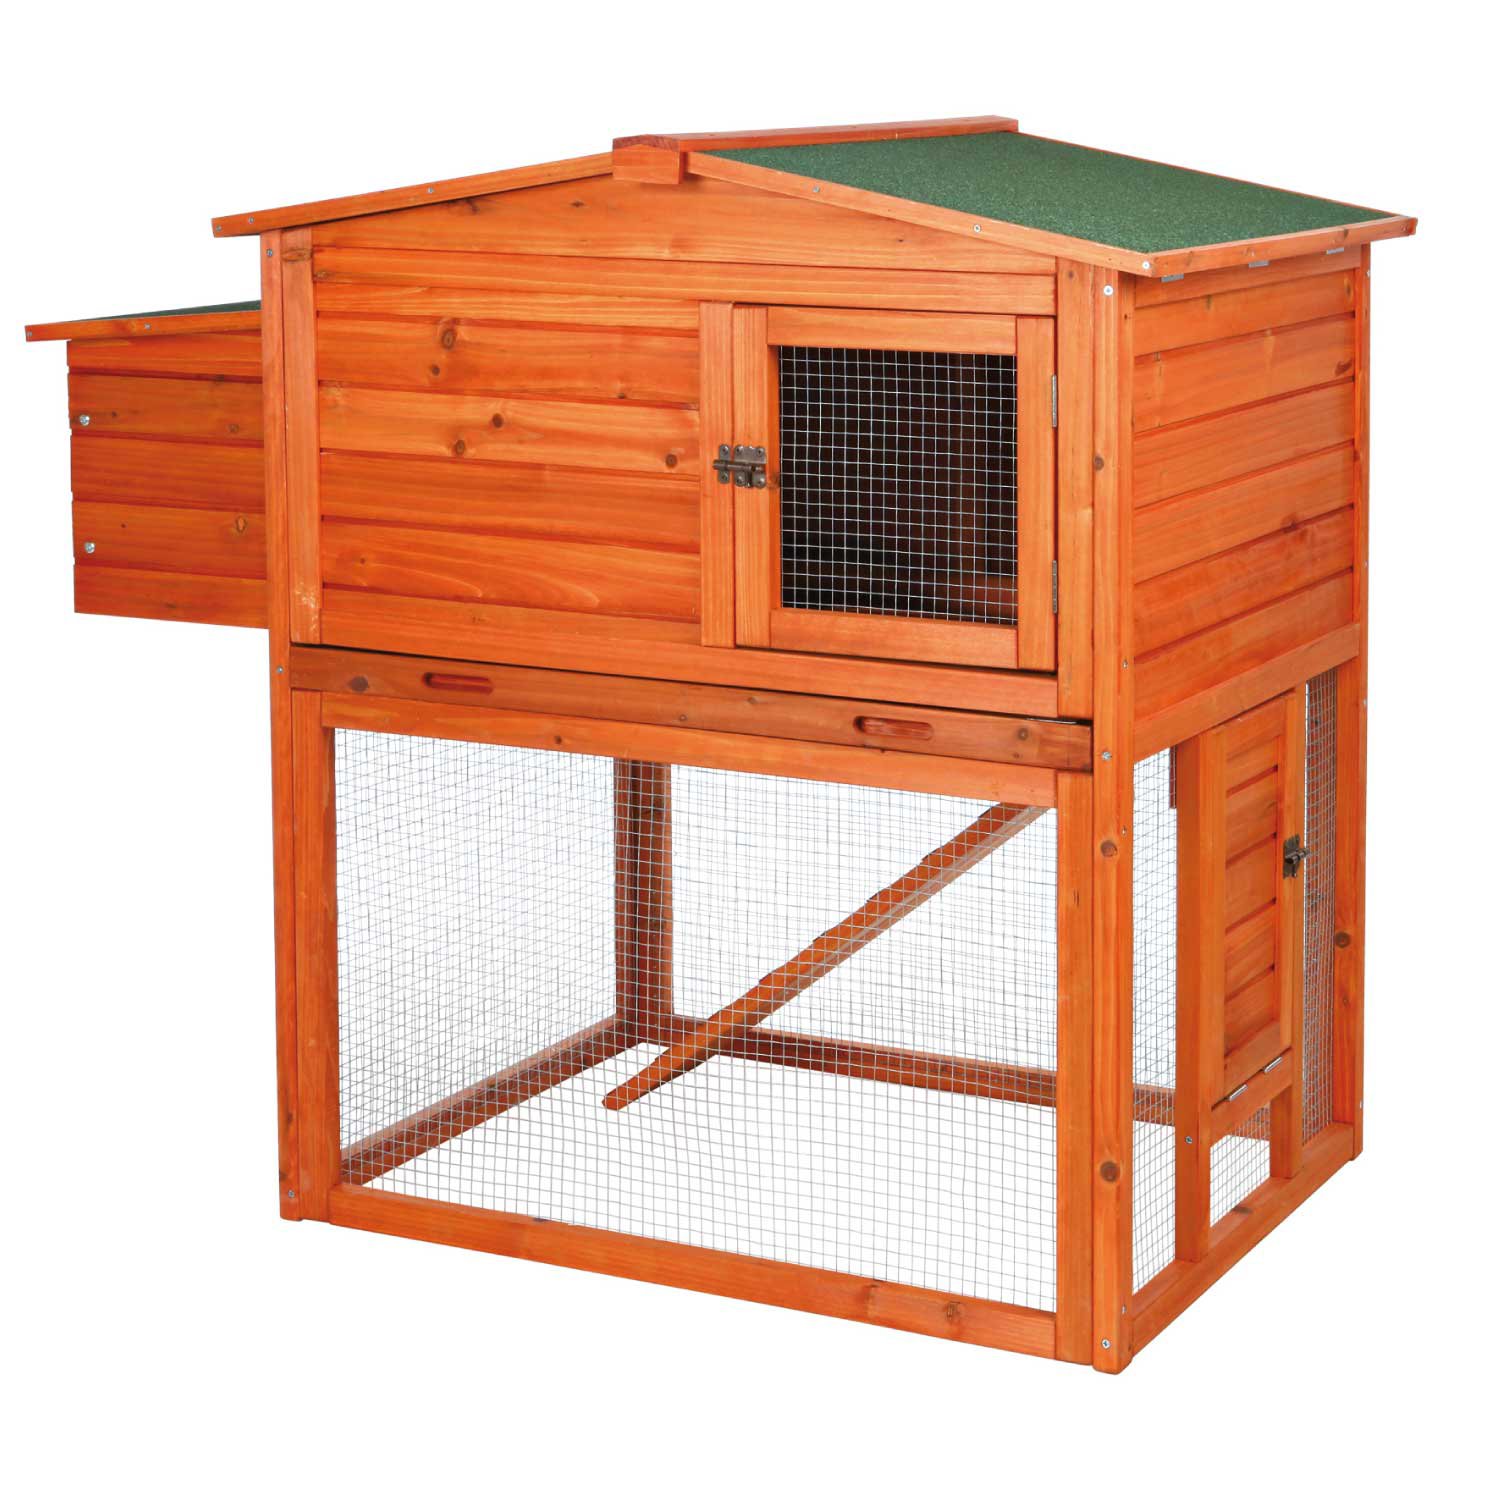 Trixie Natura Chicken Coop with Outdoor Run | Petco